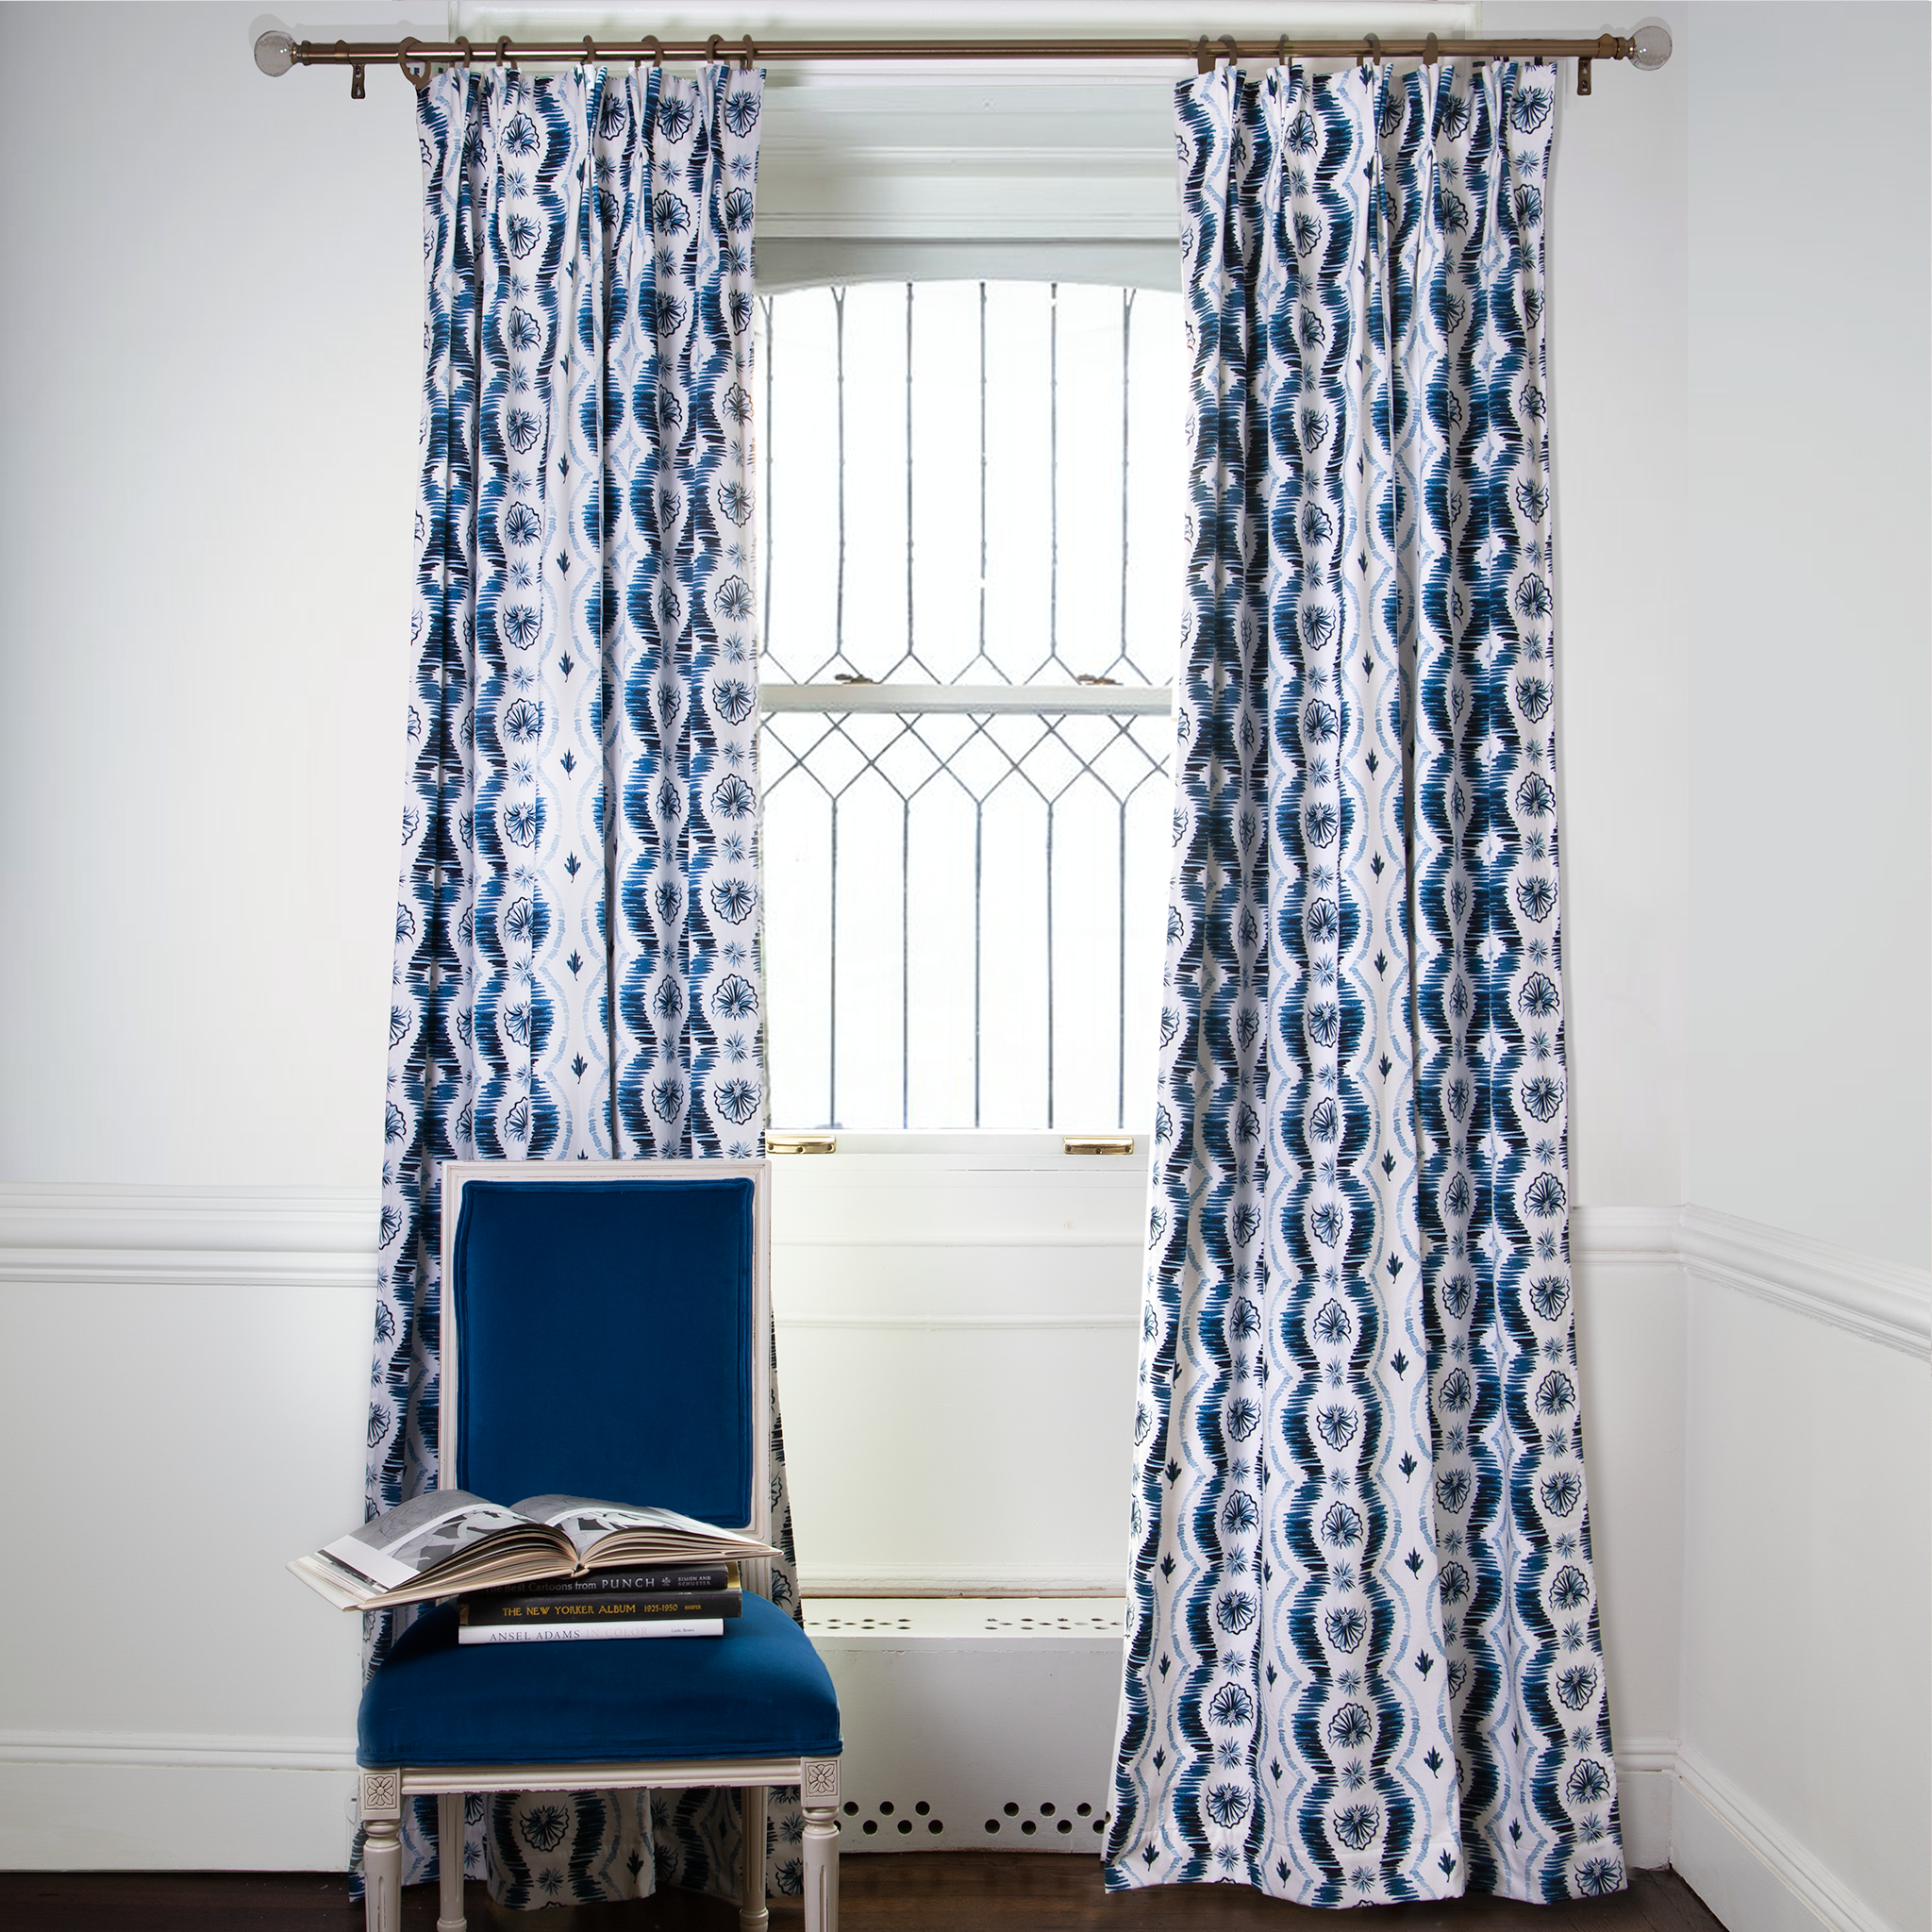 Blue Ikat striped curtains on metal rod in front of an illuminated window with navy chair in front stacked with books